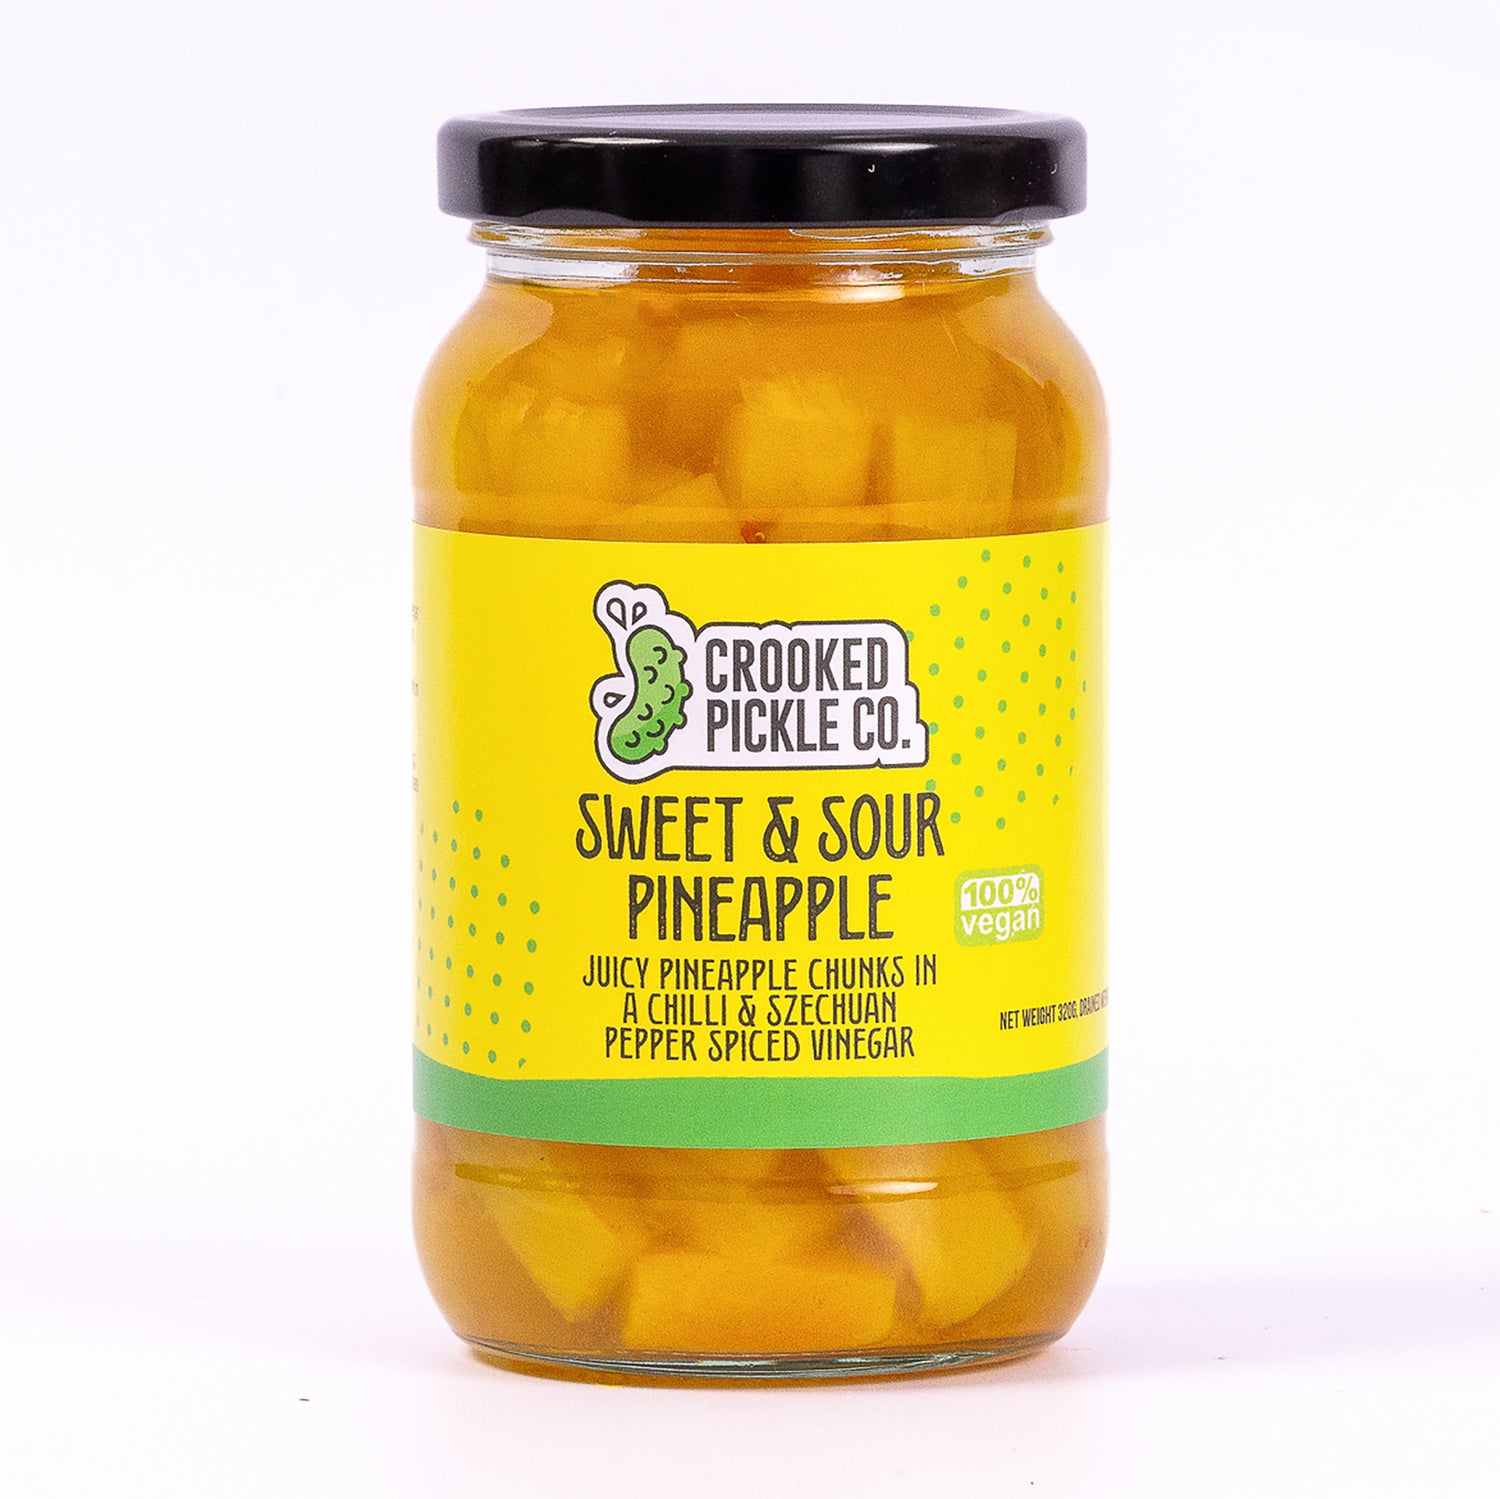 Pineapple pickles in a jar with chilli and szechuan pepper. Cheese pickle and Asian food condiment.